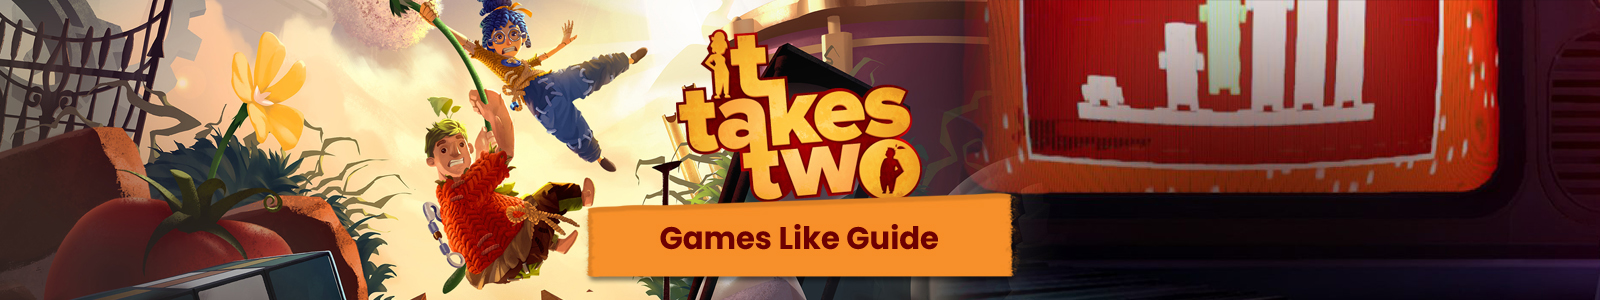 It Takes Two games like guide